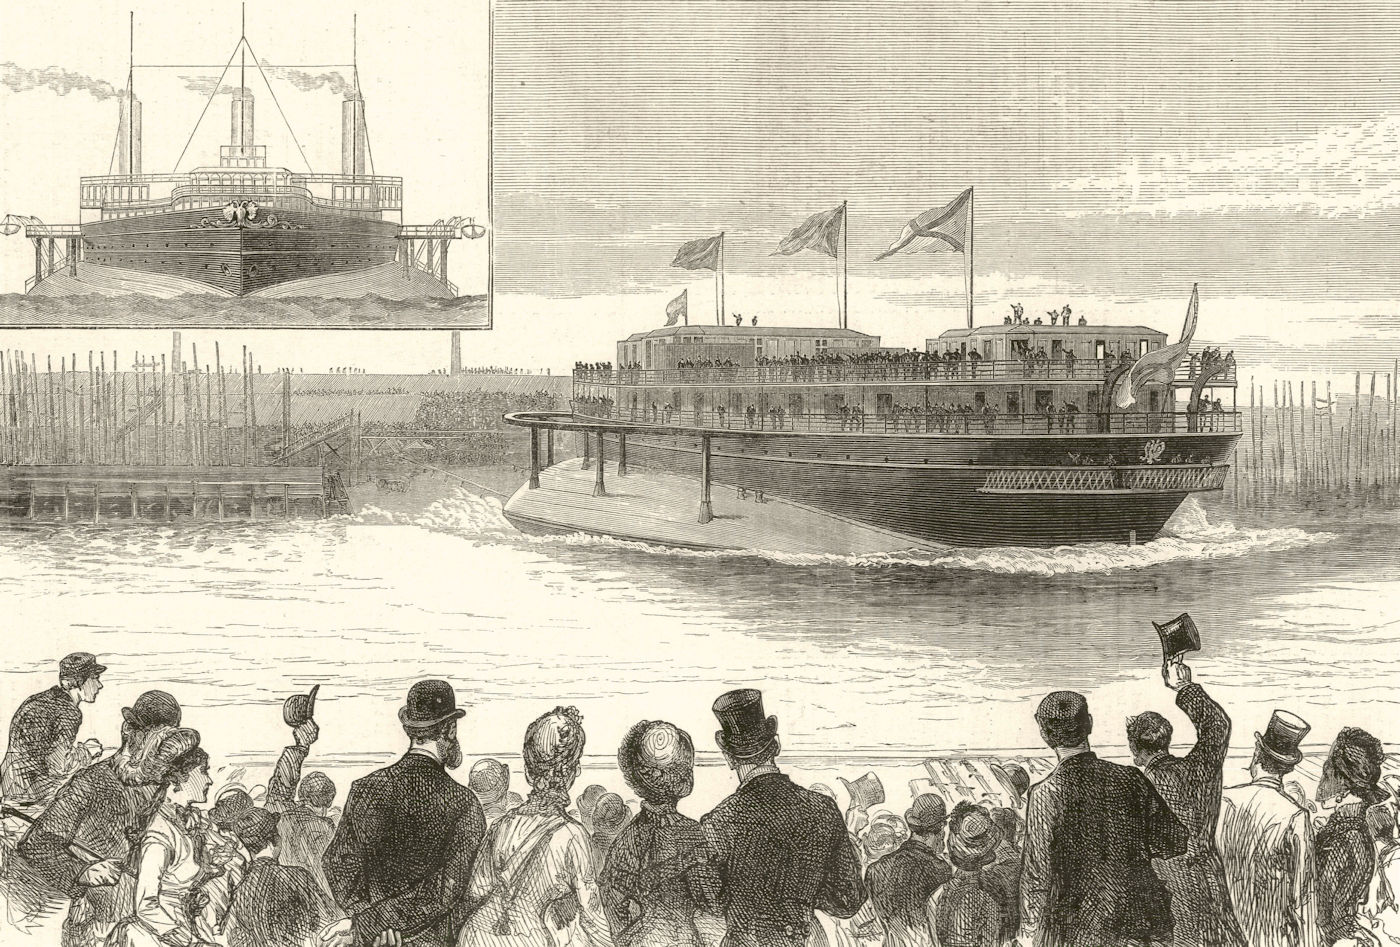 Associate Product Launch of the Emperor of Russia's Yacht Livadia at Glasgow. Scotland 1880